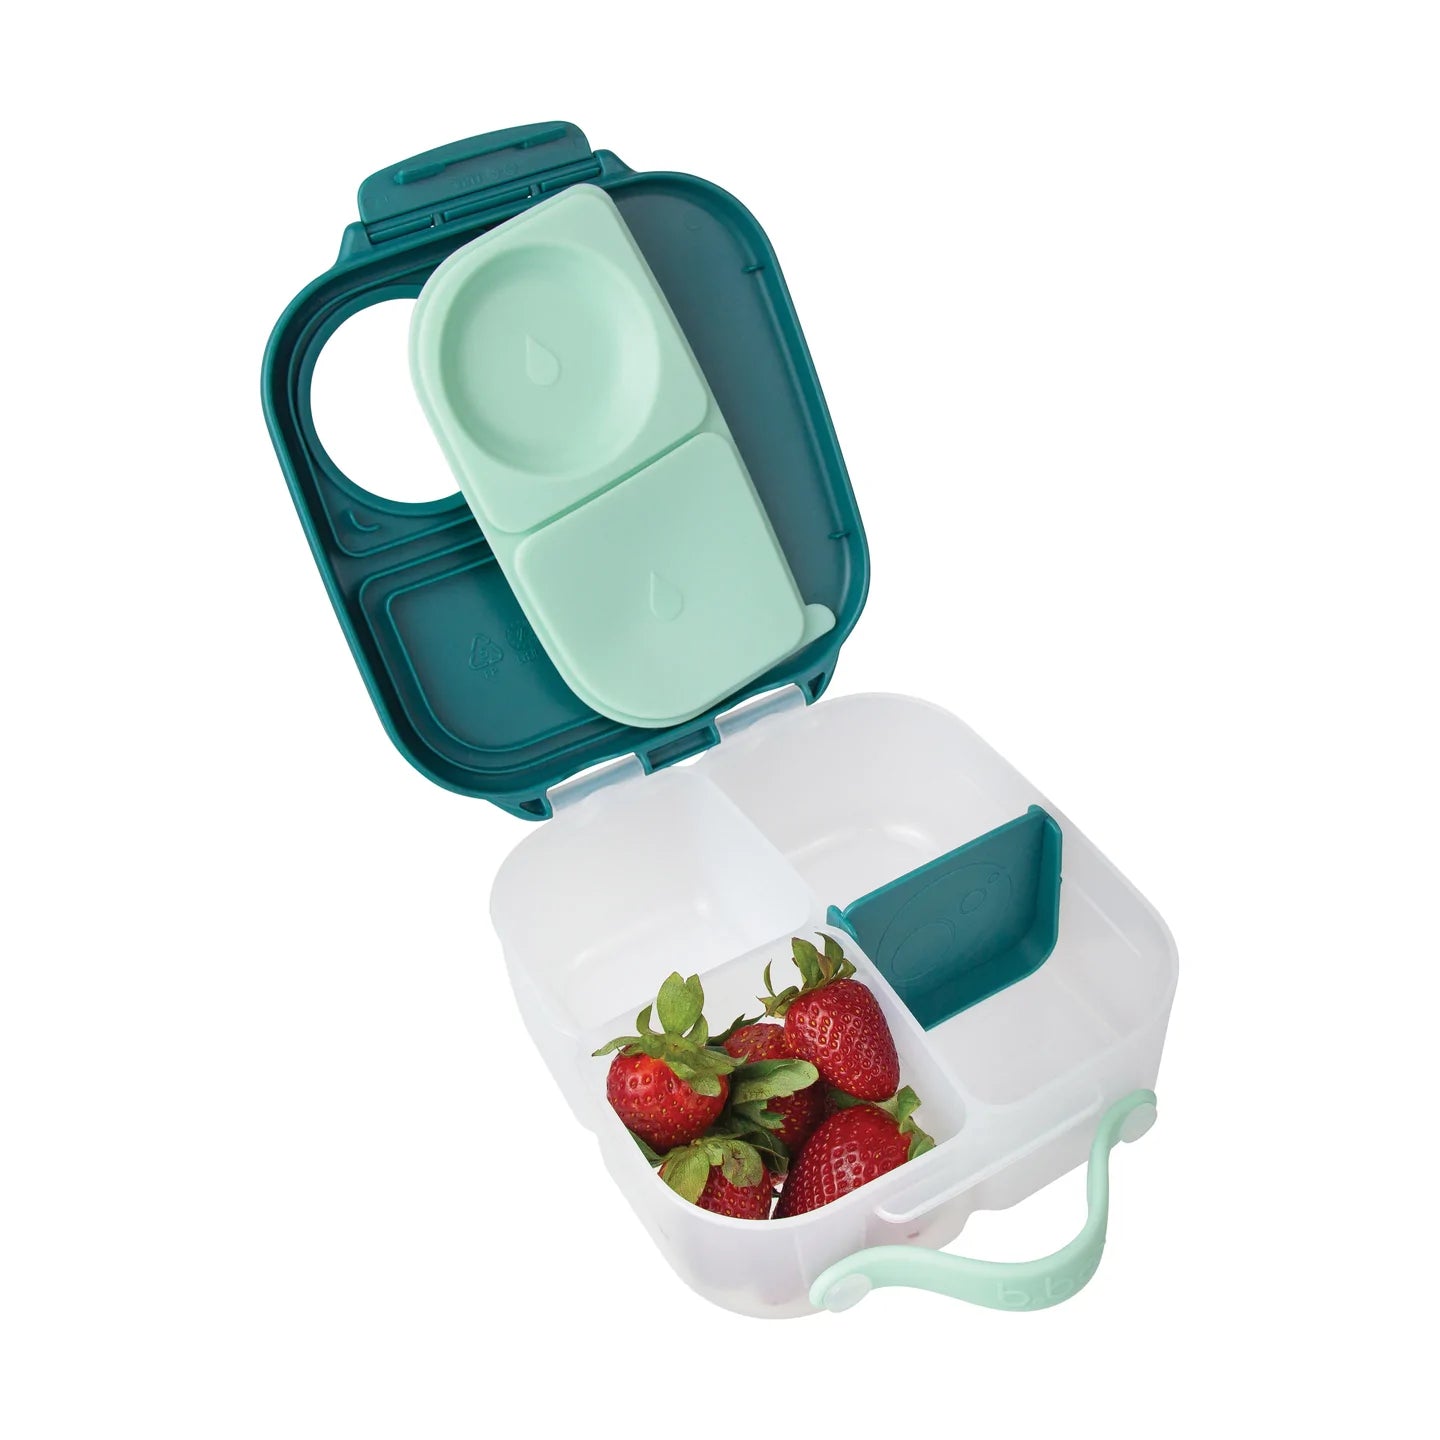 Bbox bento mini lunch box - angus and dudley 